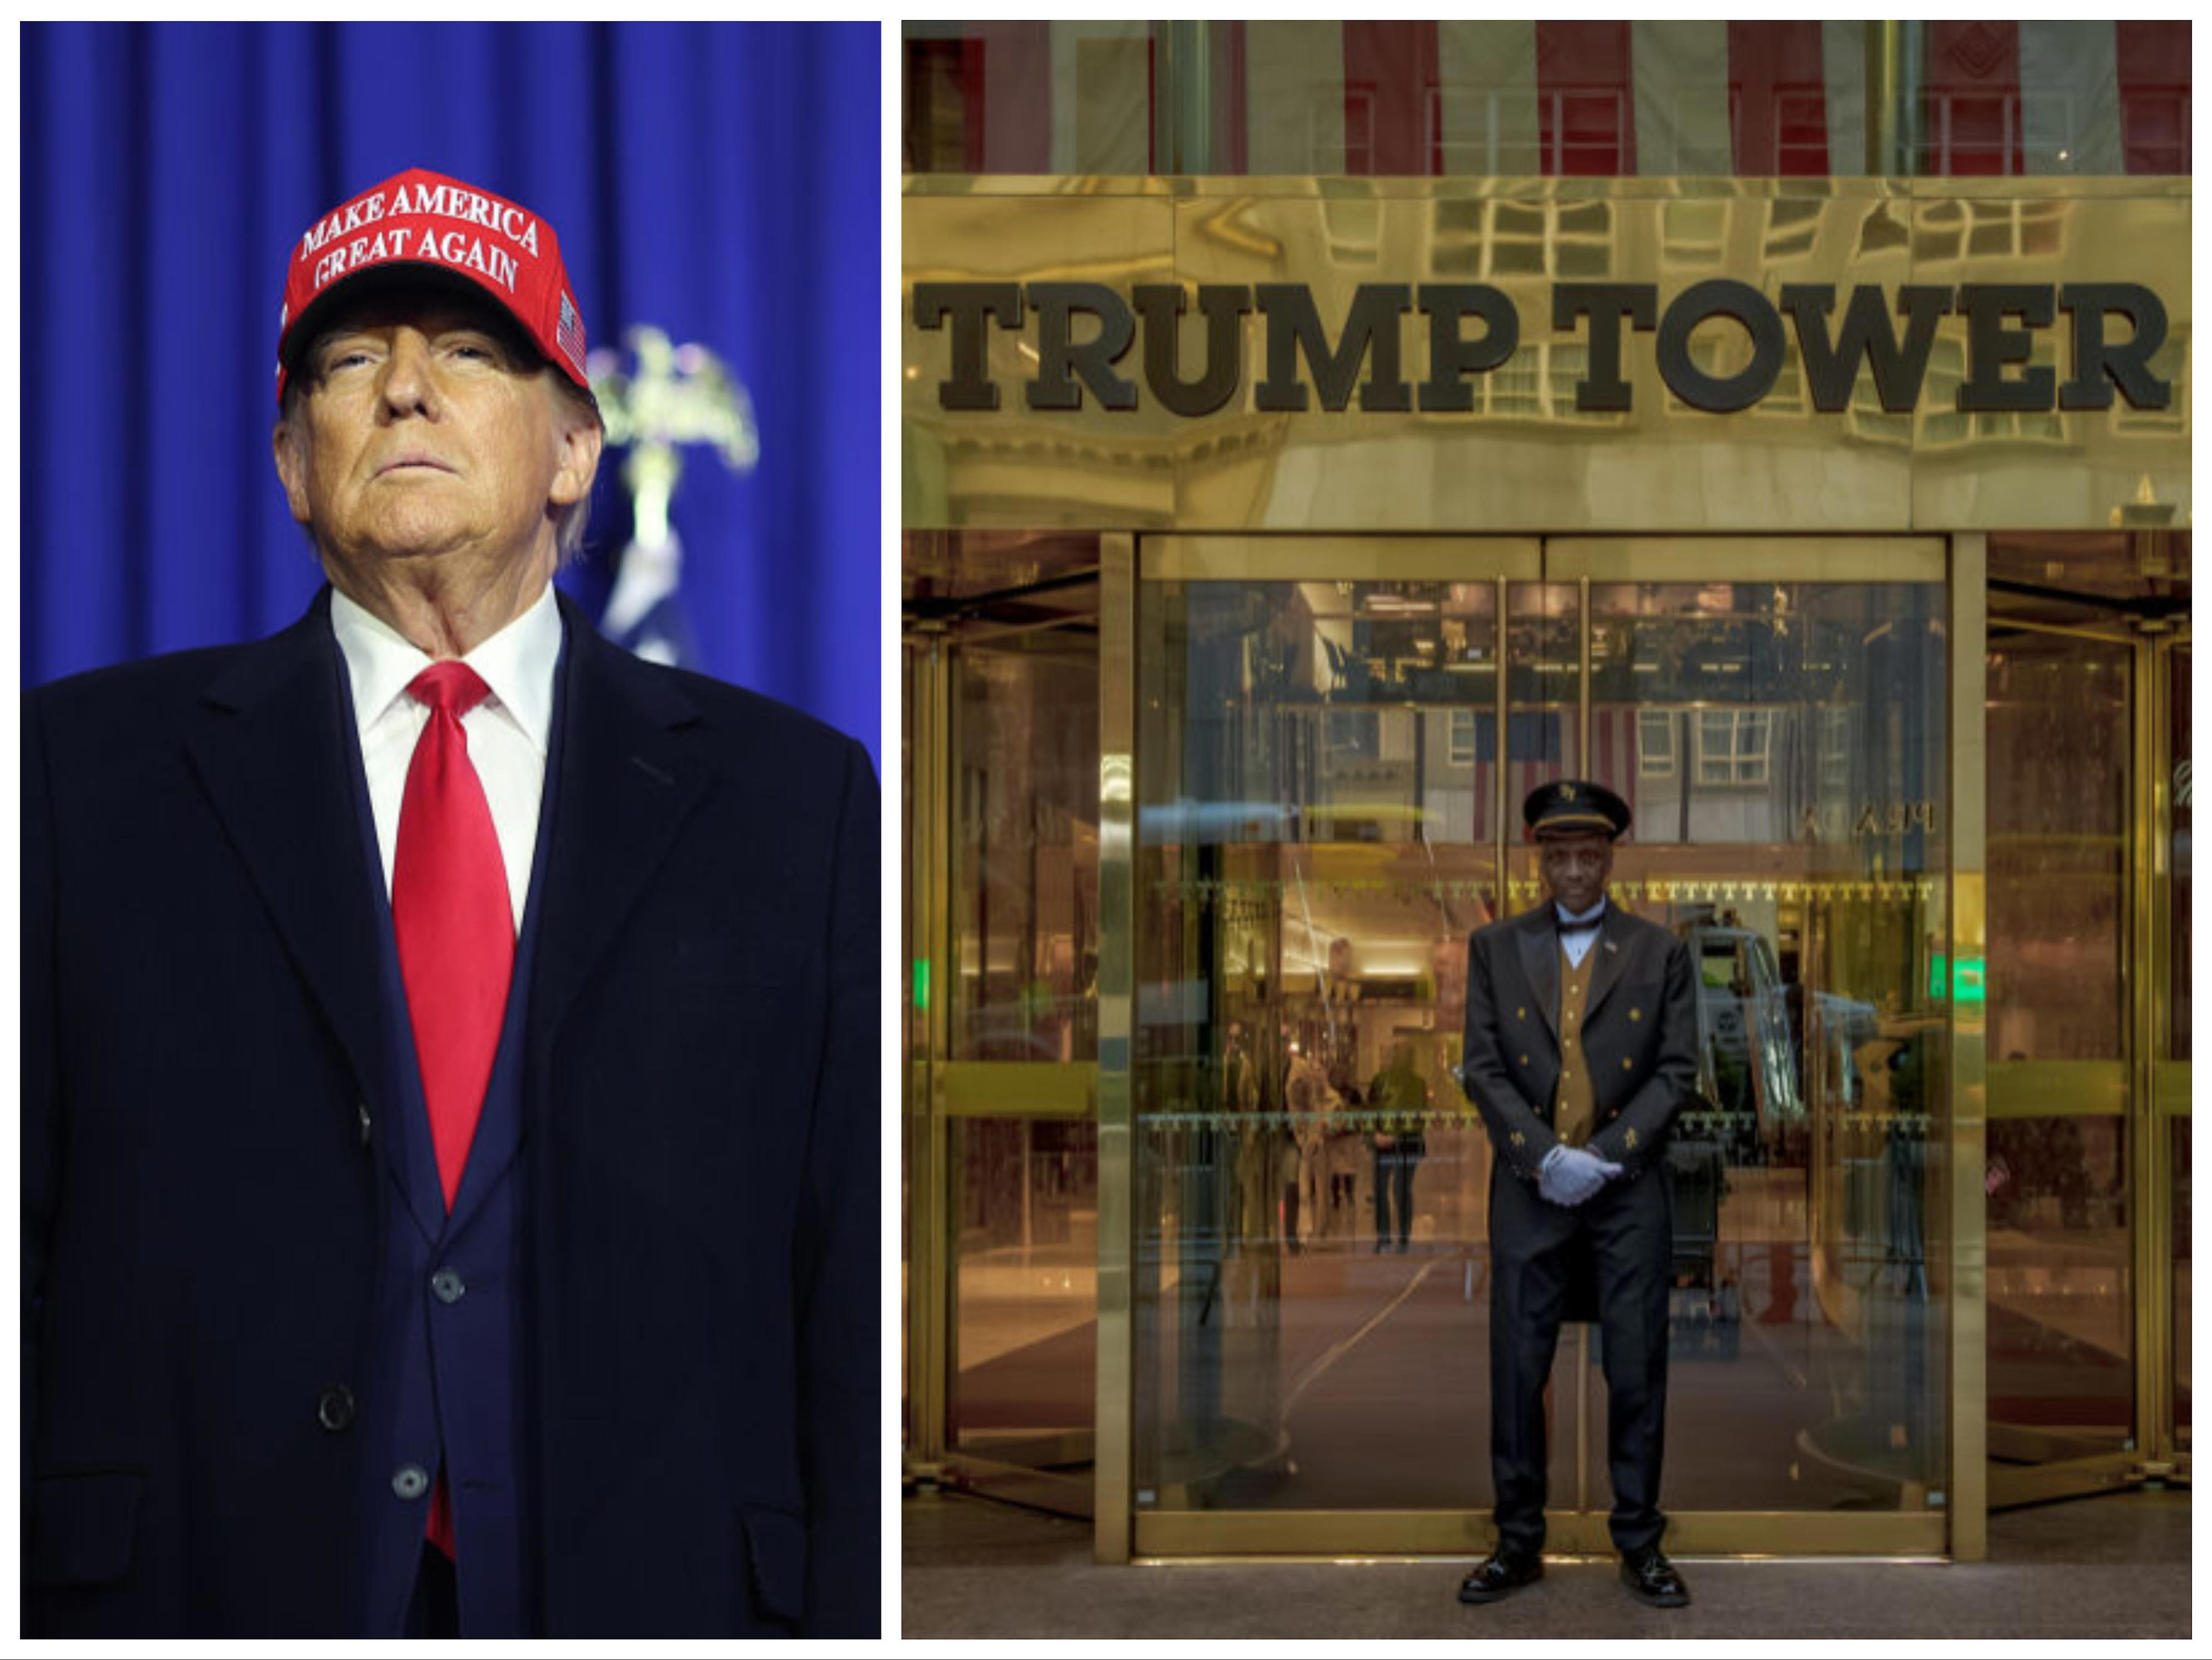 trump-branded properties are selling for far less than buildings that removed his name, report says